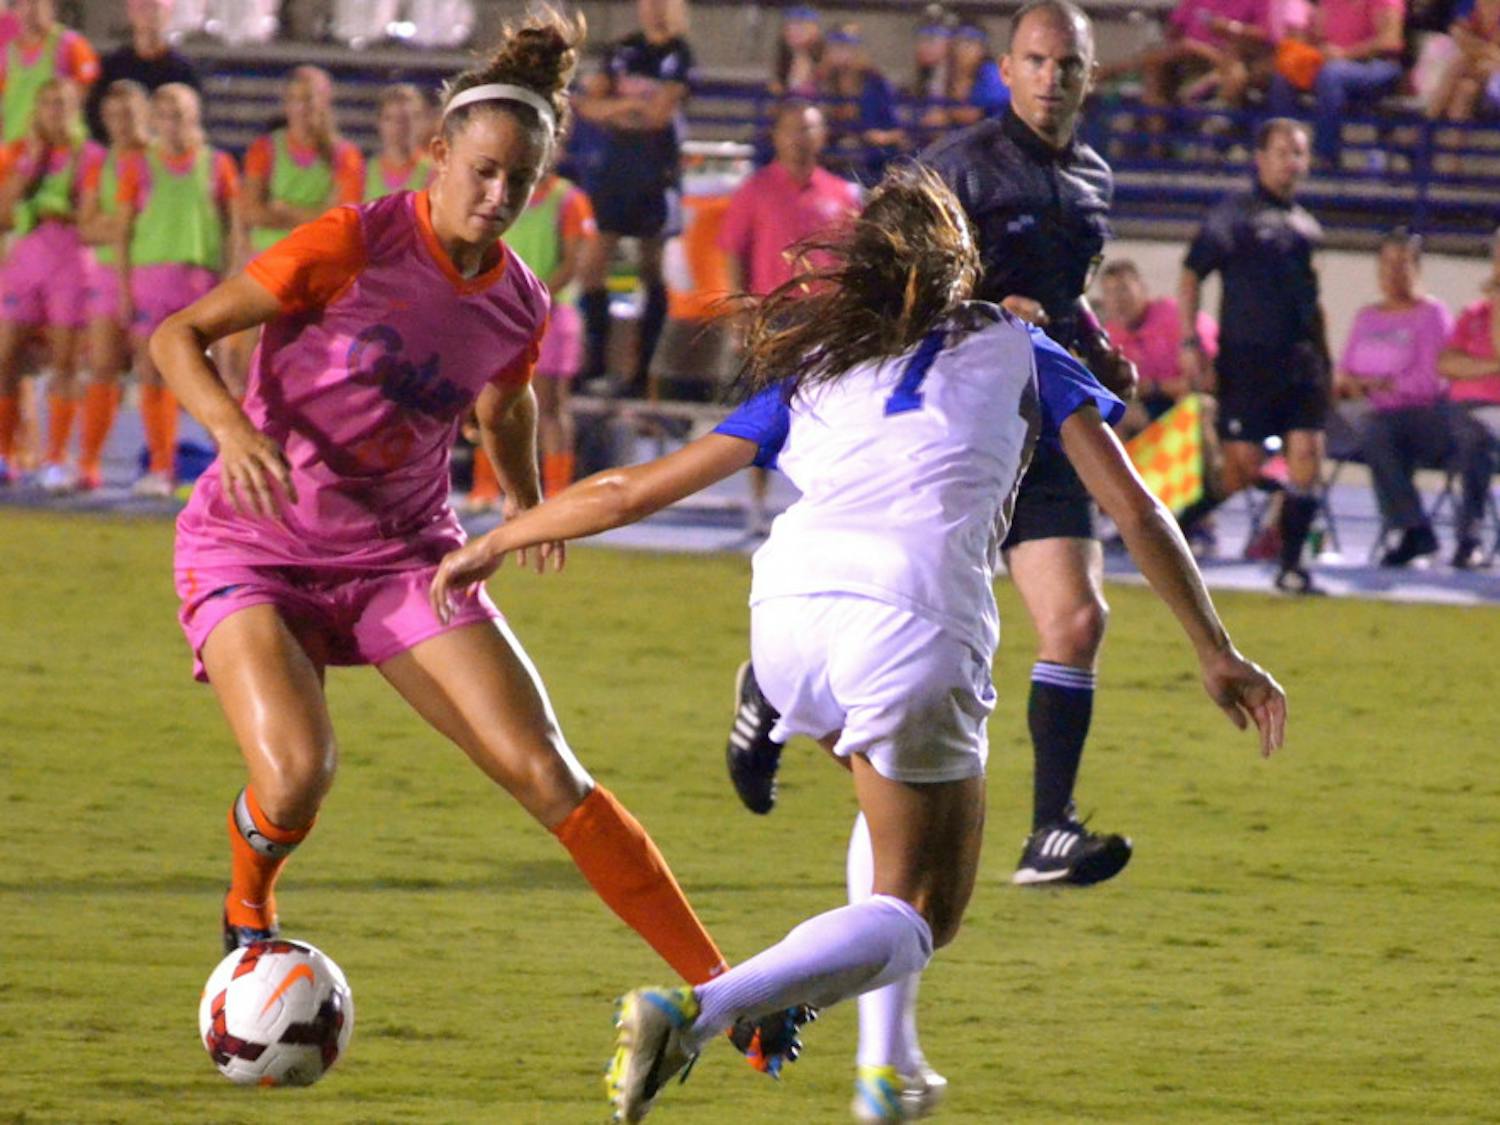 Florida junior midfielder Havana Solaun fakes out a Kentucky defender during the Gators' 3-0 win against the Wildcats on Oct. 18 2013 at James G. Pressly Stadium.